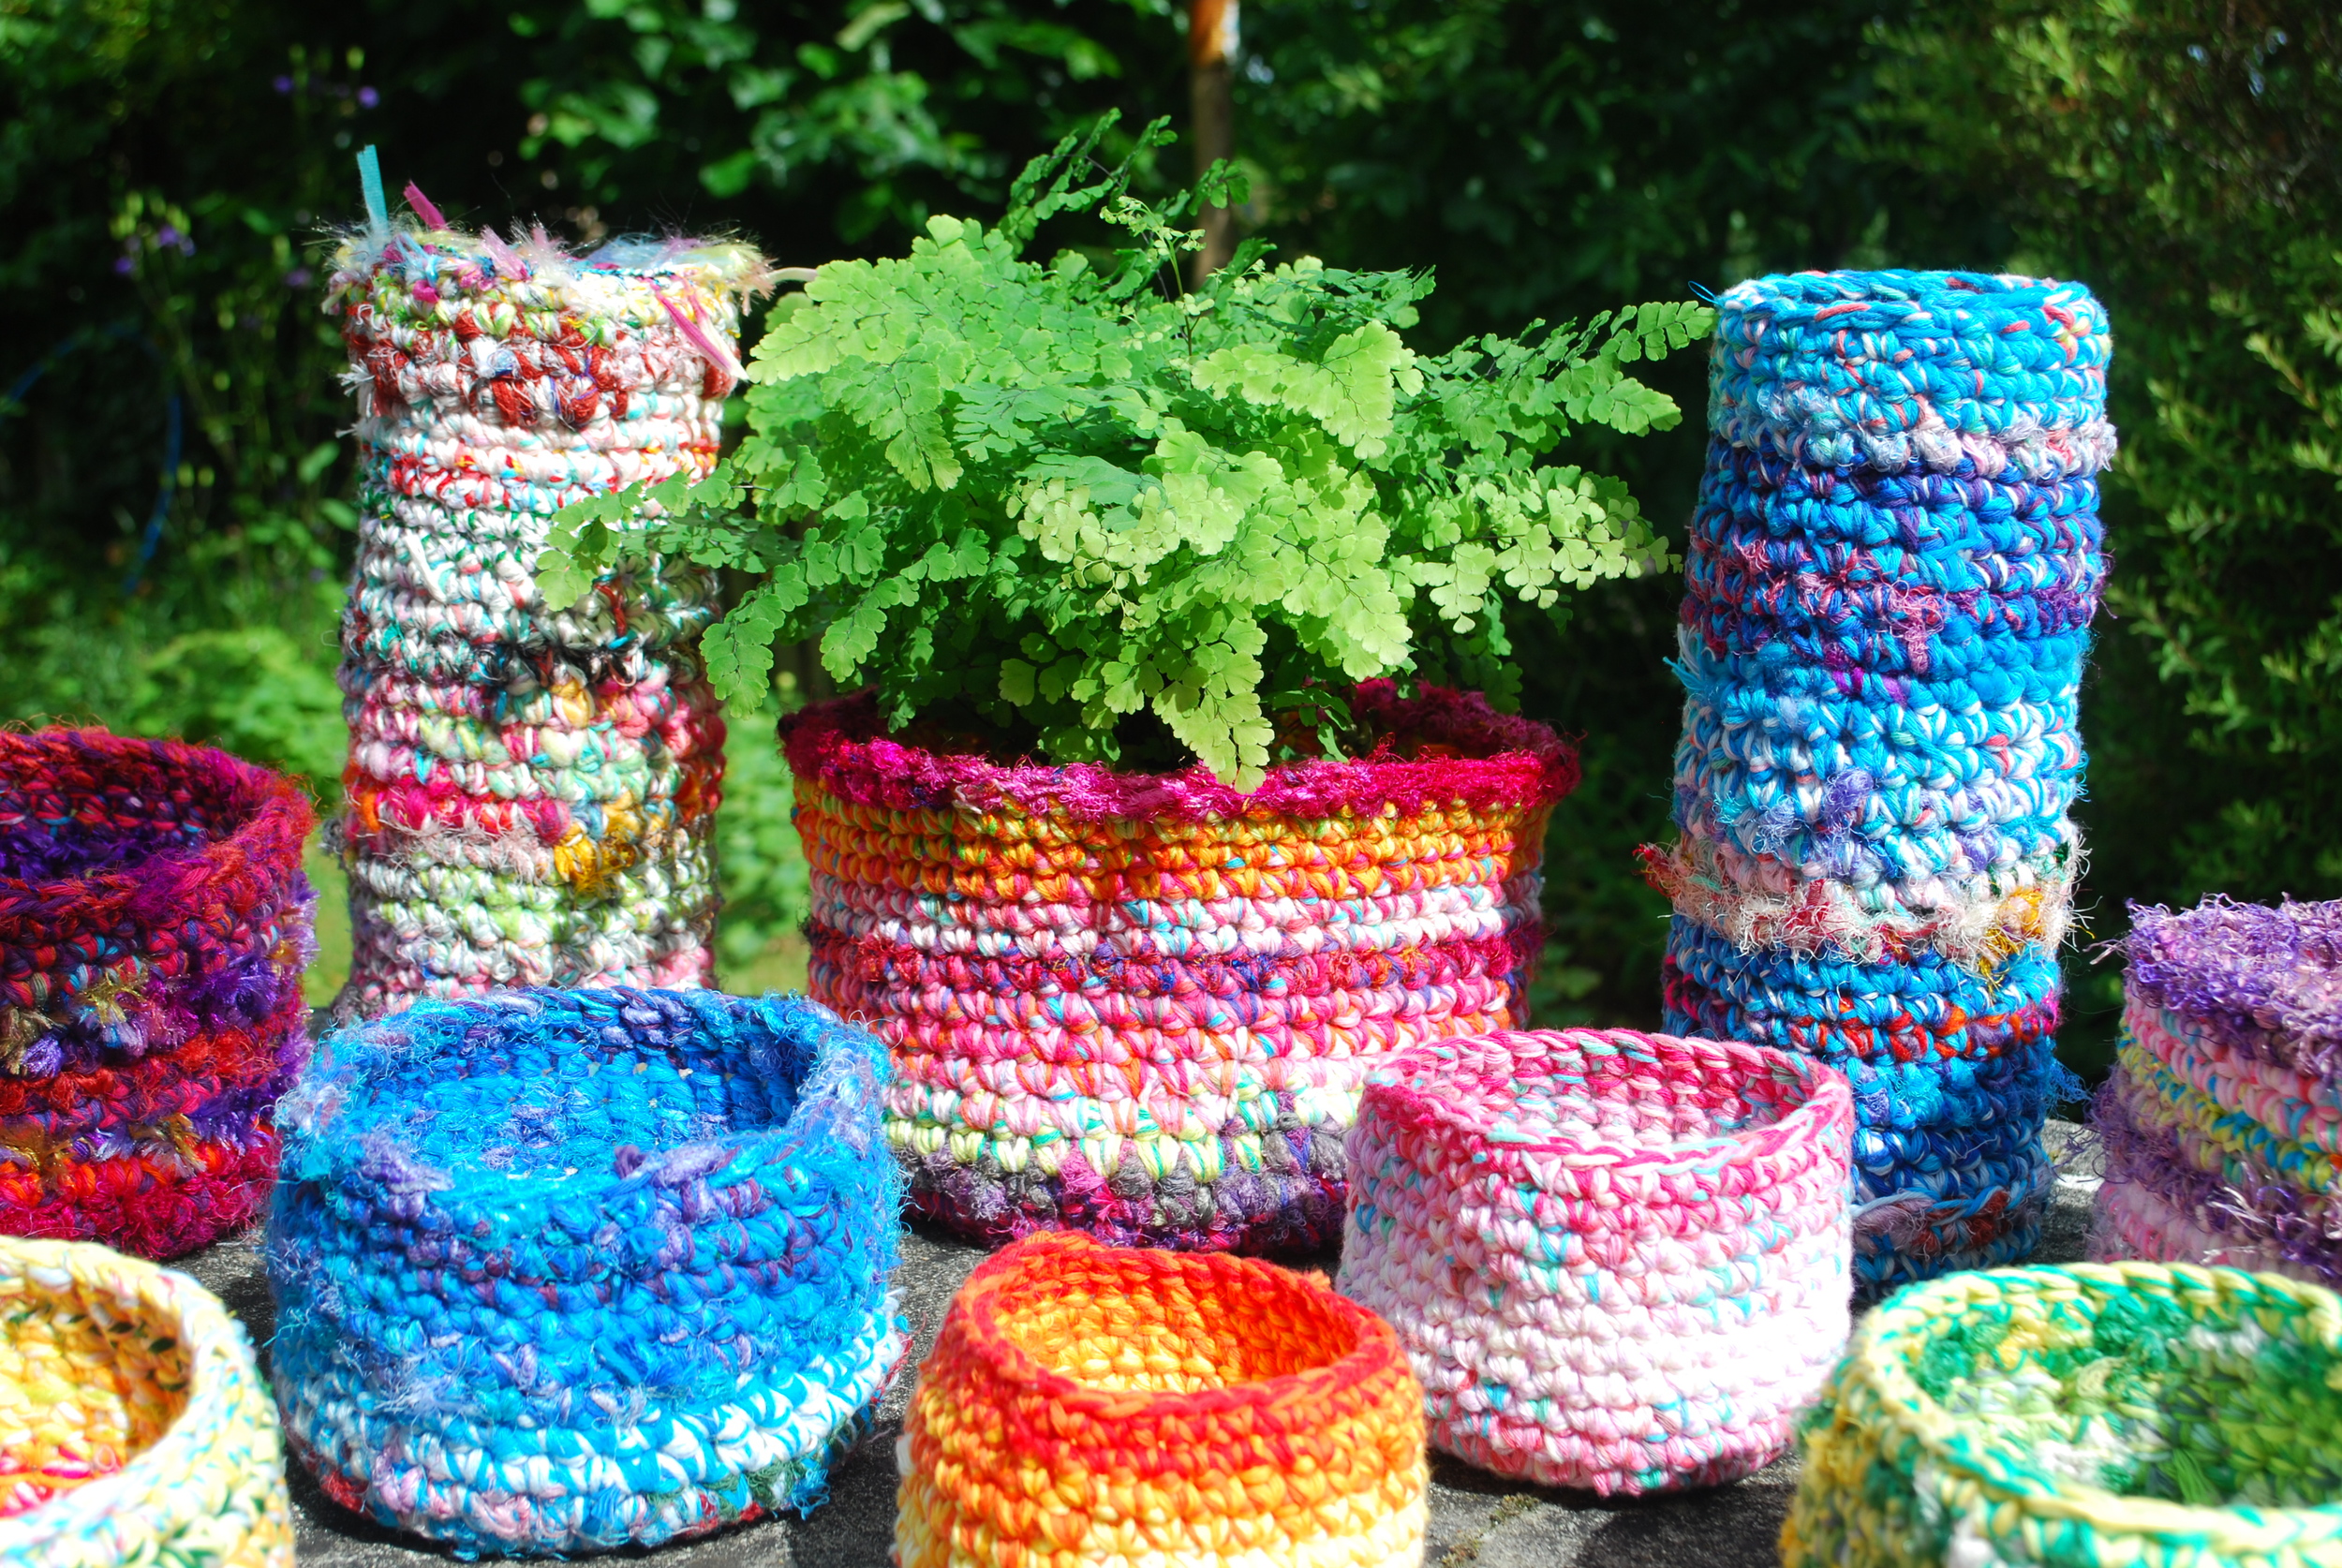 How to crochet a round basket (any size / any yarn)